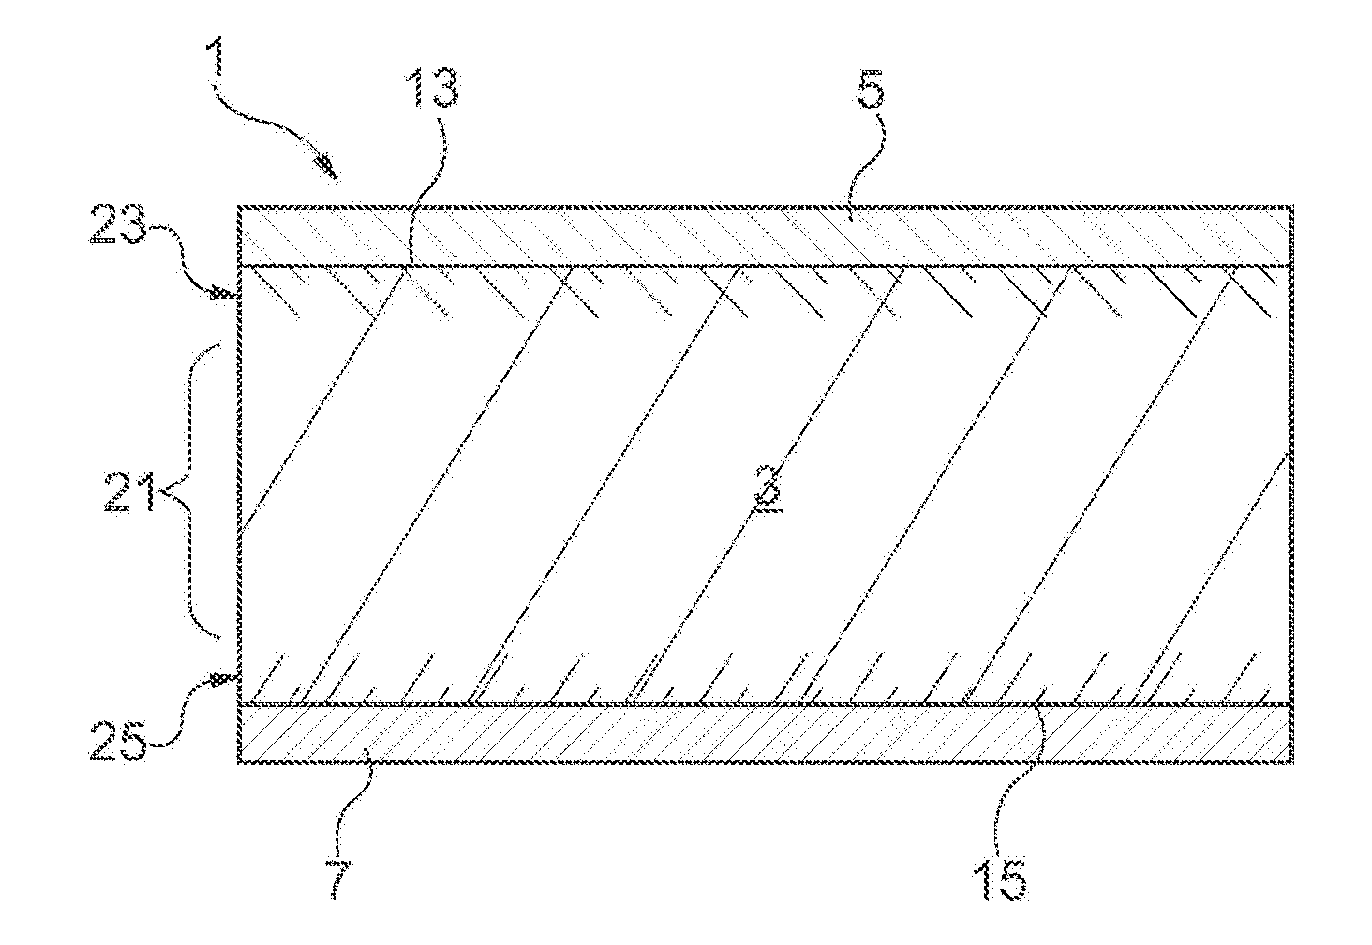 Heterojunction solar cell with absorber having an integrated doping profile